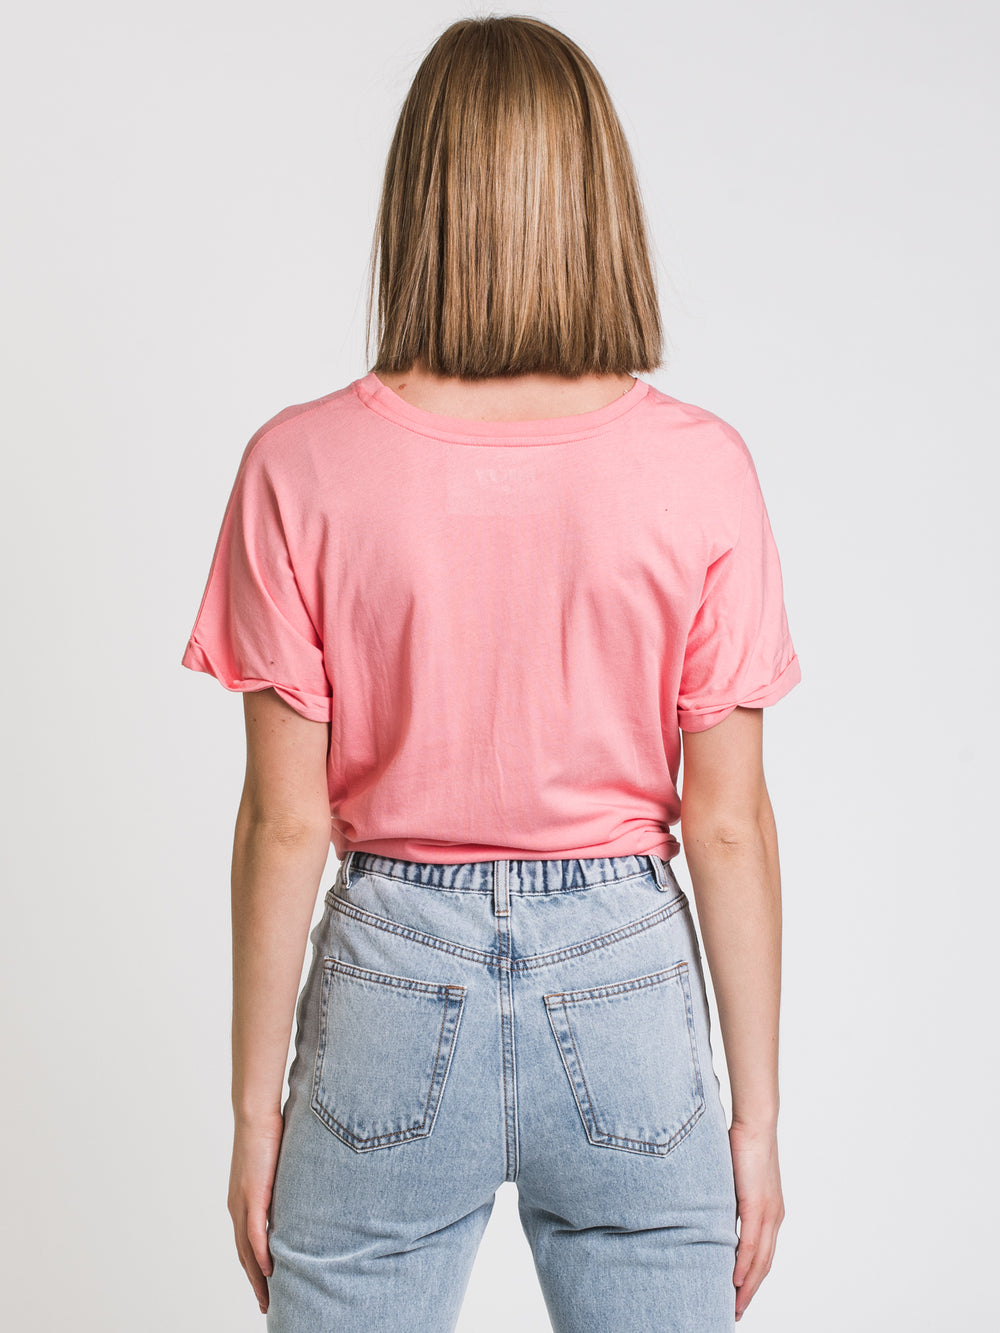 HARLOW LAYLA KNOTTED TEE - CLEARANCE